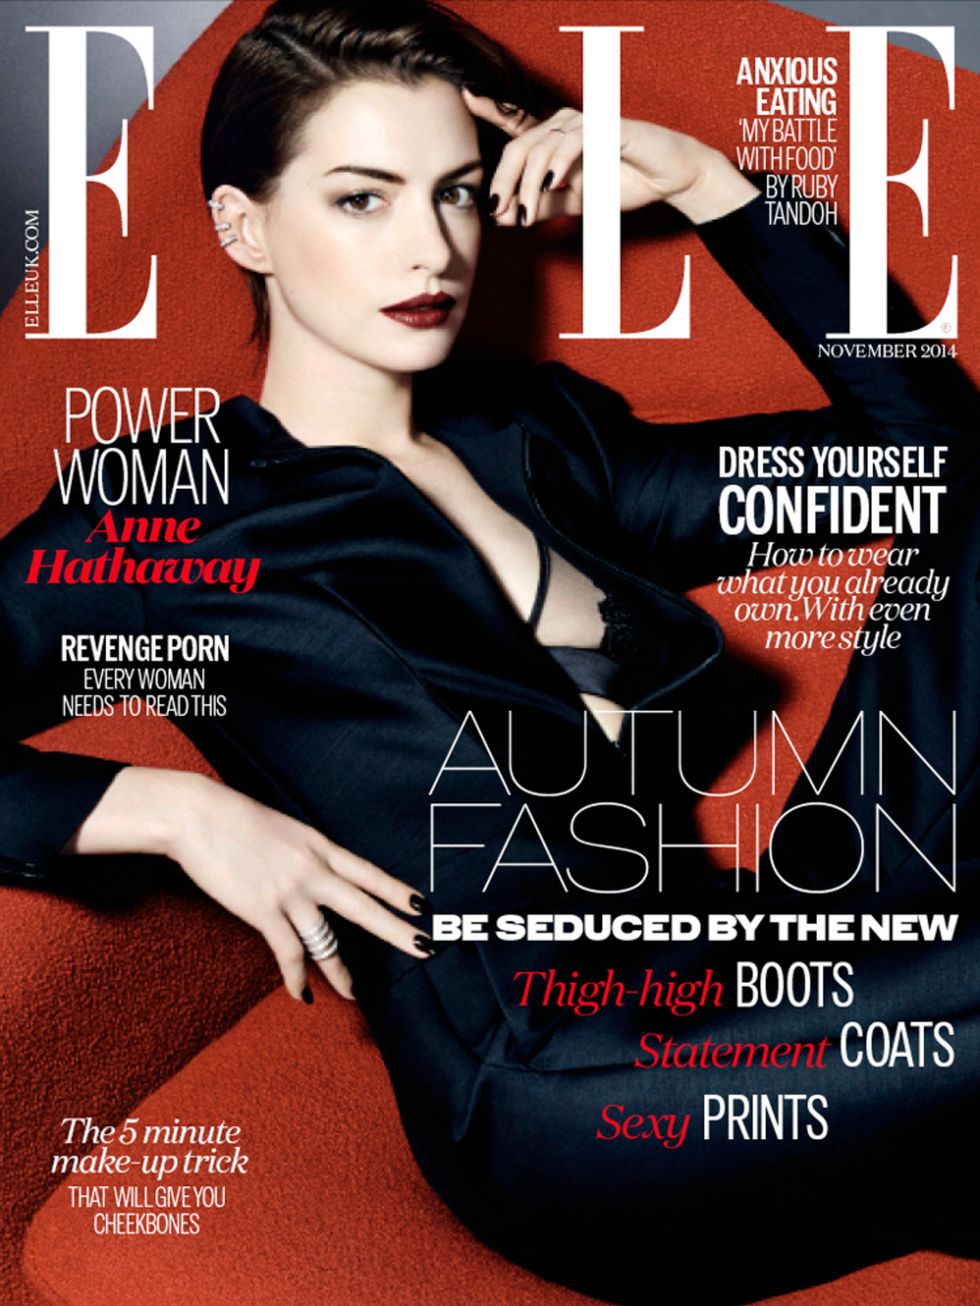 <p>Anne Hathaway on the cover of <a href="http://www.elleuk.com/now-trending/Anne-Hathaway-November-2014-cover-revealed">ELLE November</a> Issue</p>